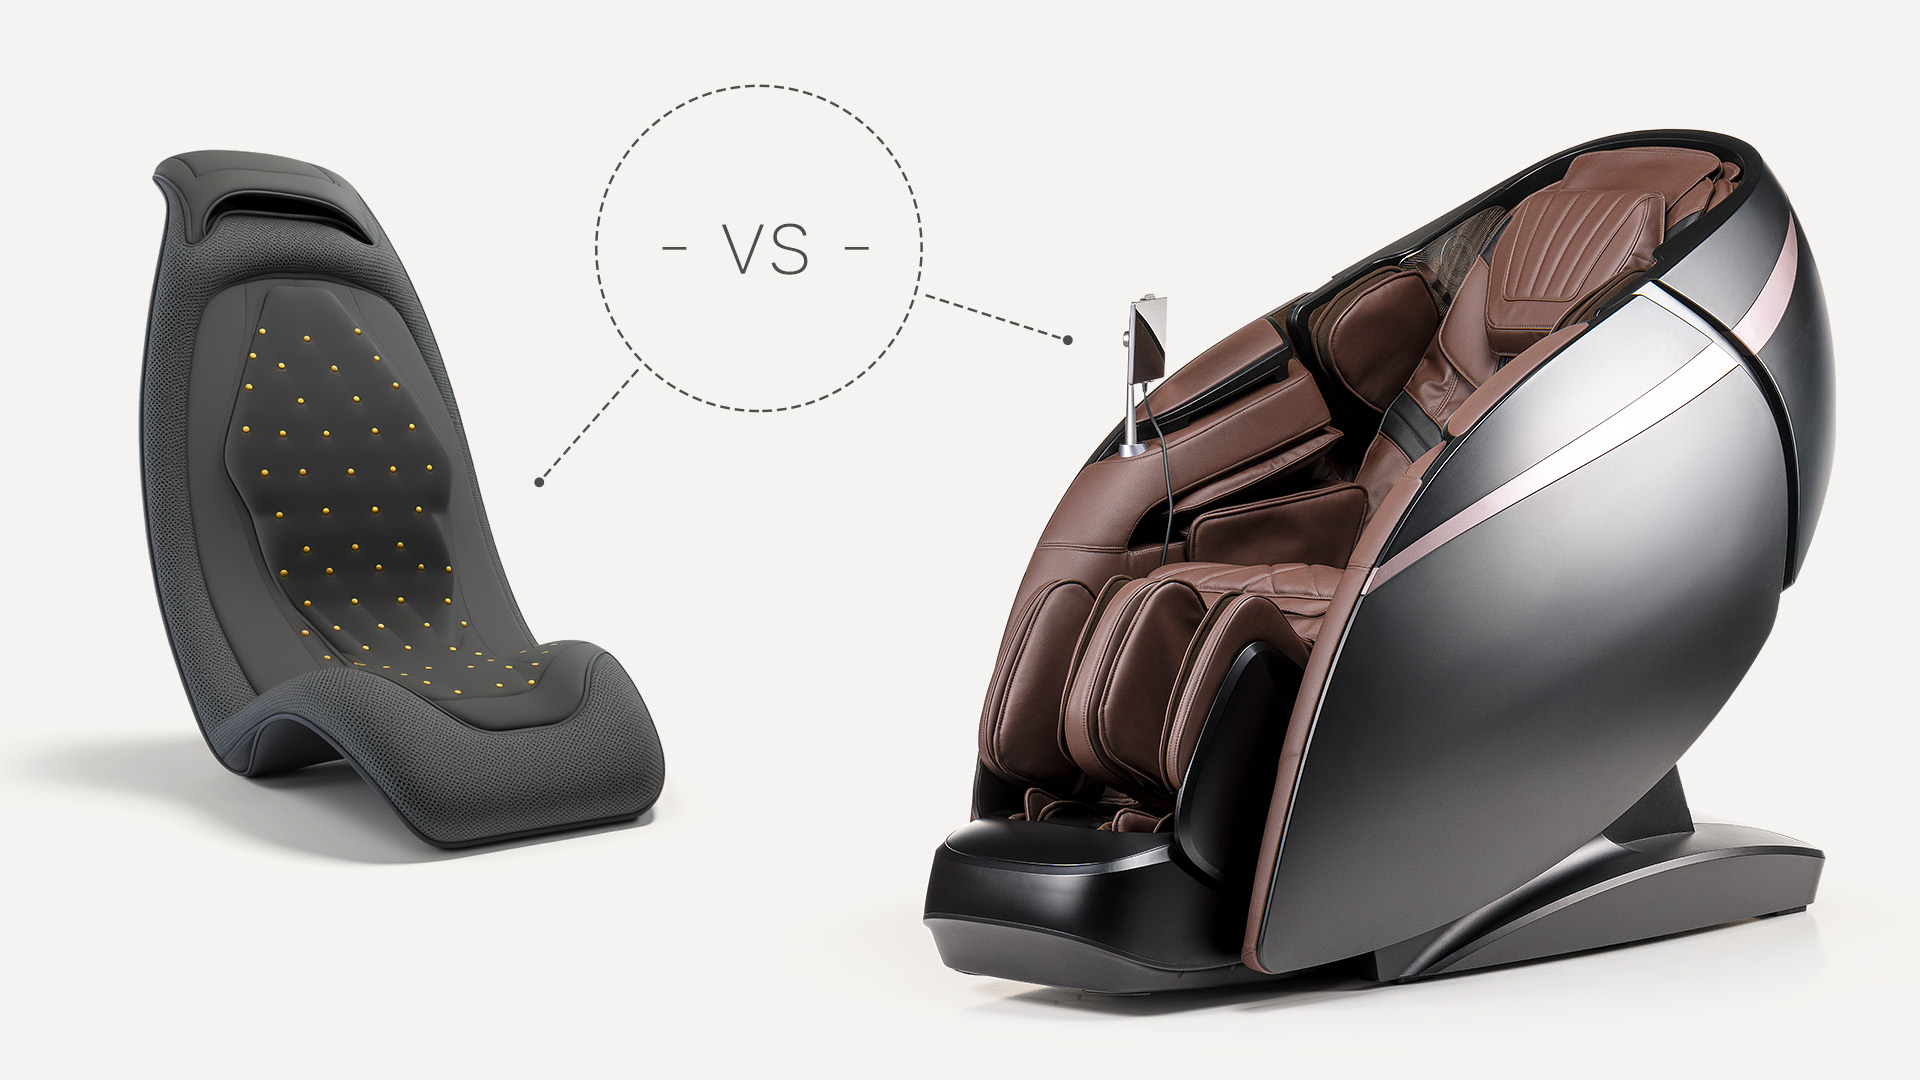 MASSAGE CUSHION OR MASSAGE CHAIR? WHICH ONE TO CHOOSE?